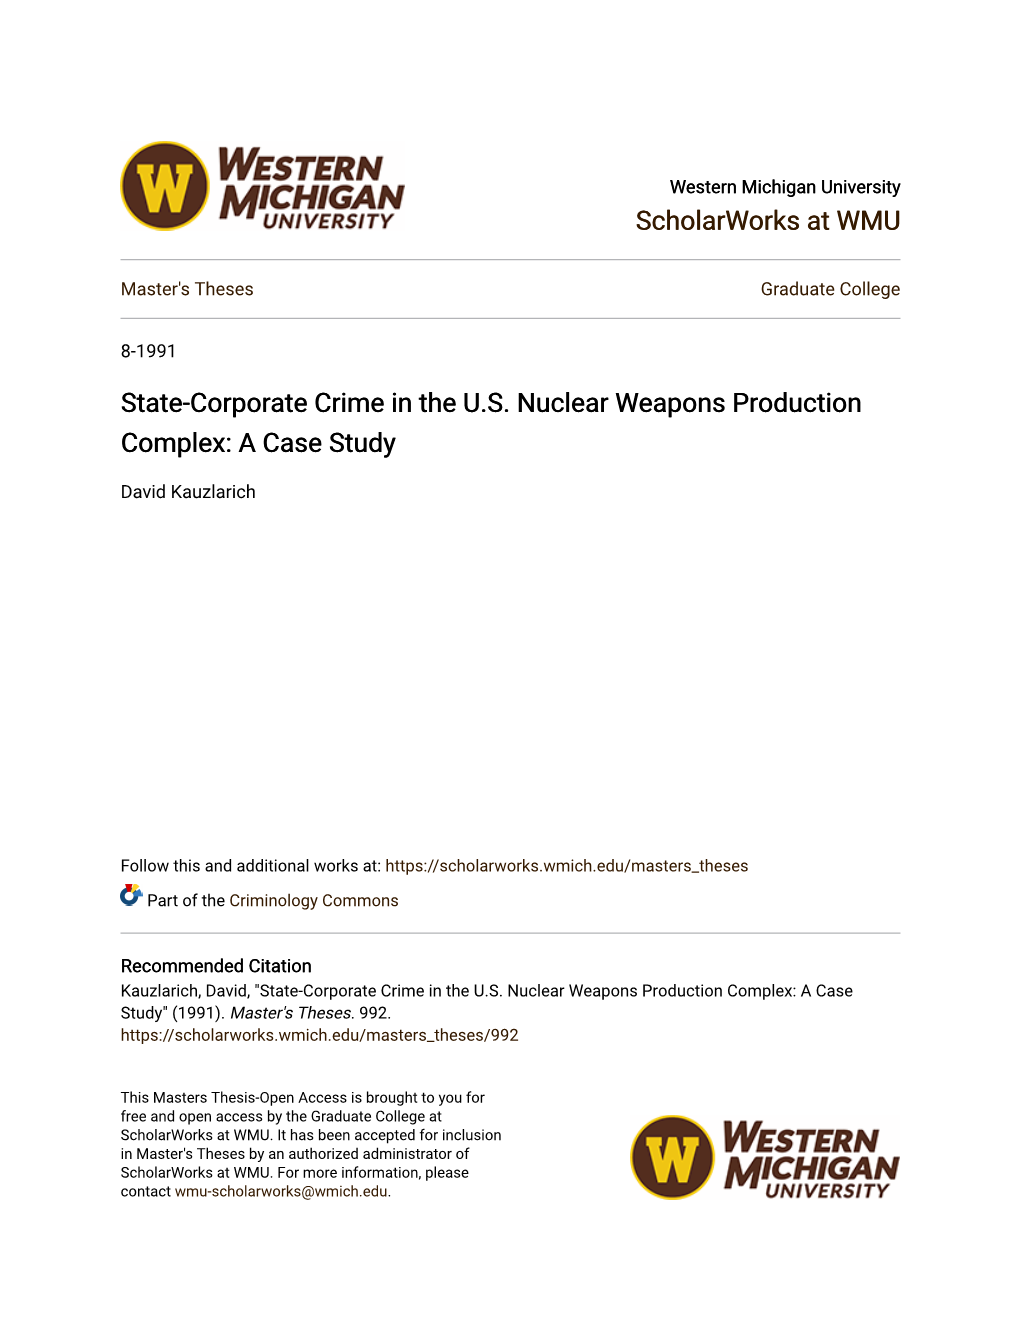 State-Corporate Crime in the US Nuclear